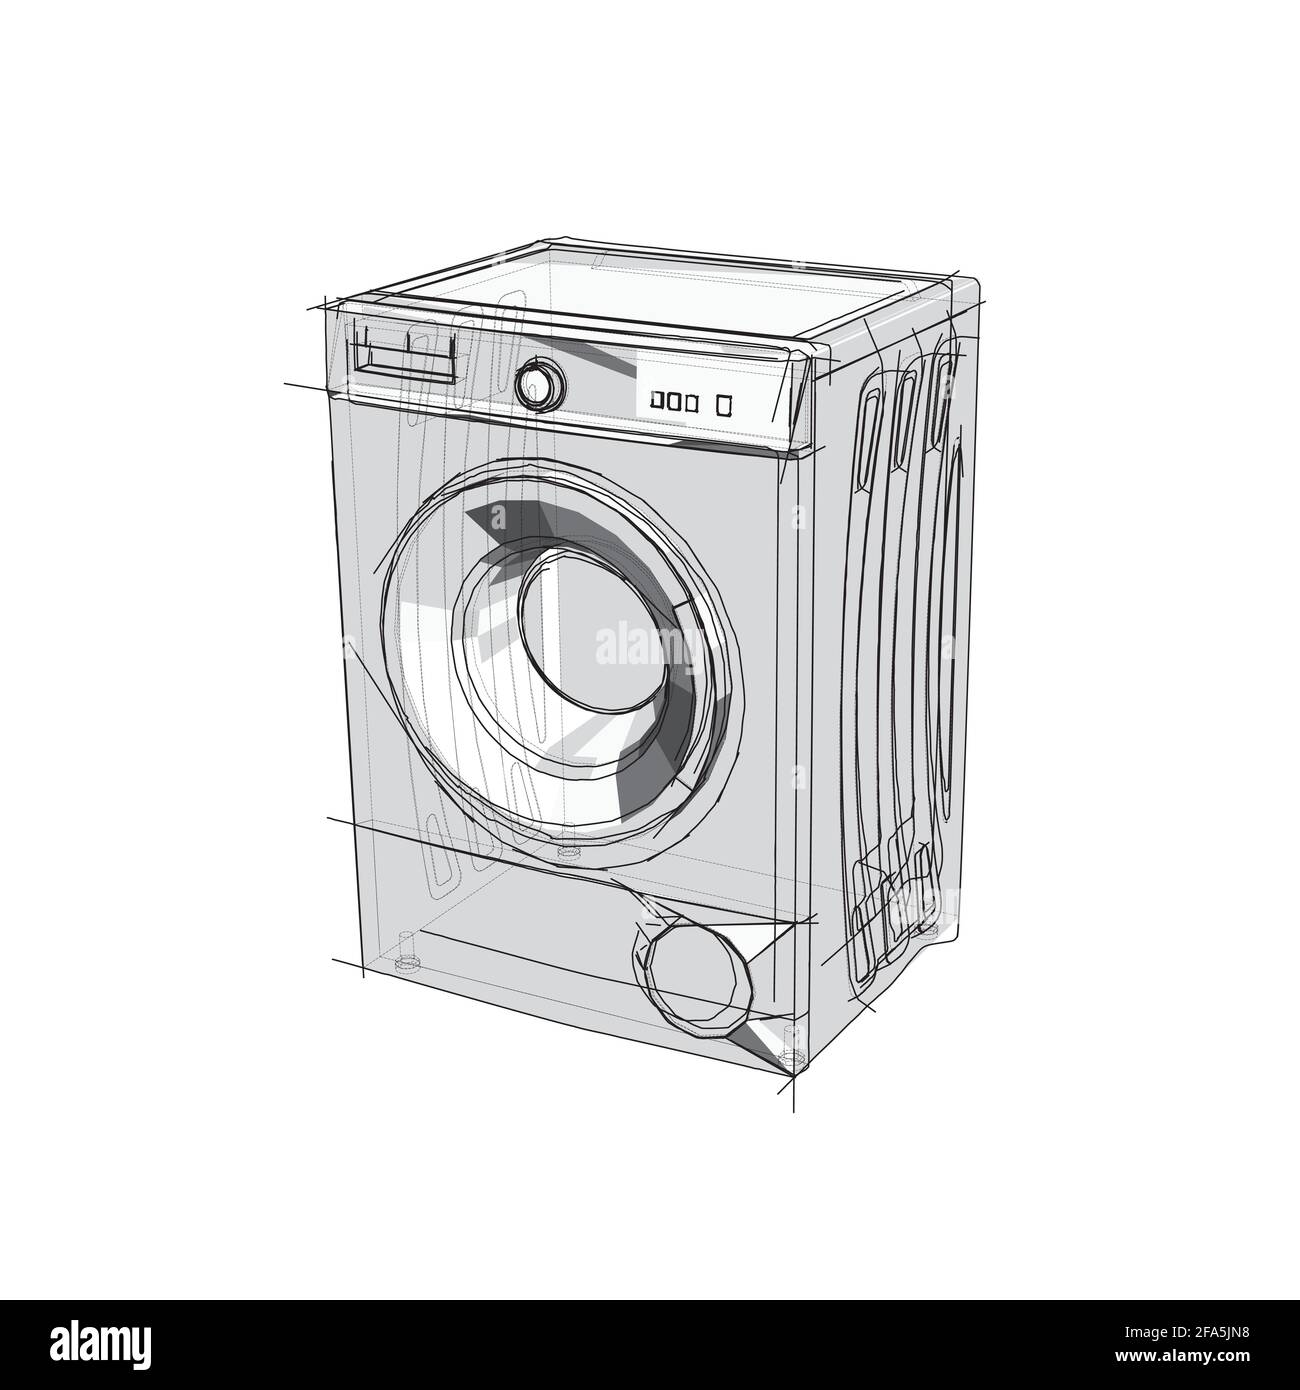 Technical drawing of a washing machine in an architectural style. Schematic vector illustration of a washer on white background Stock Vector